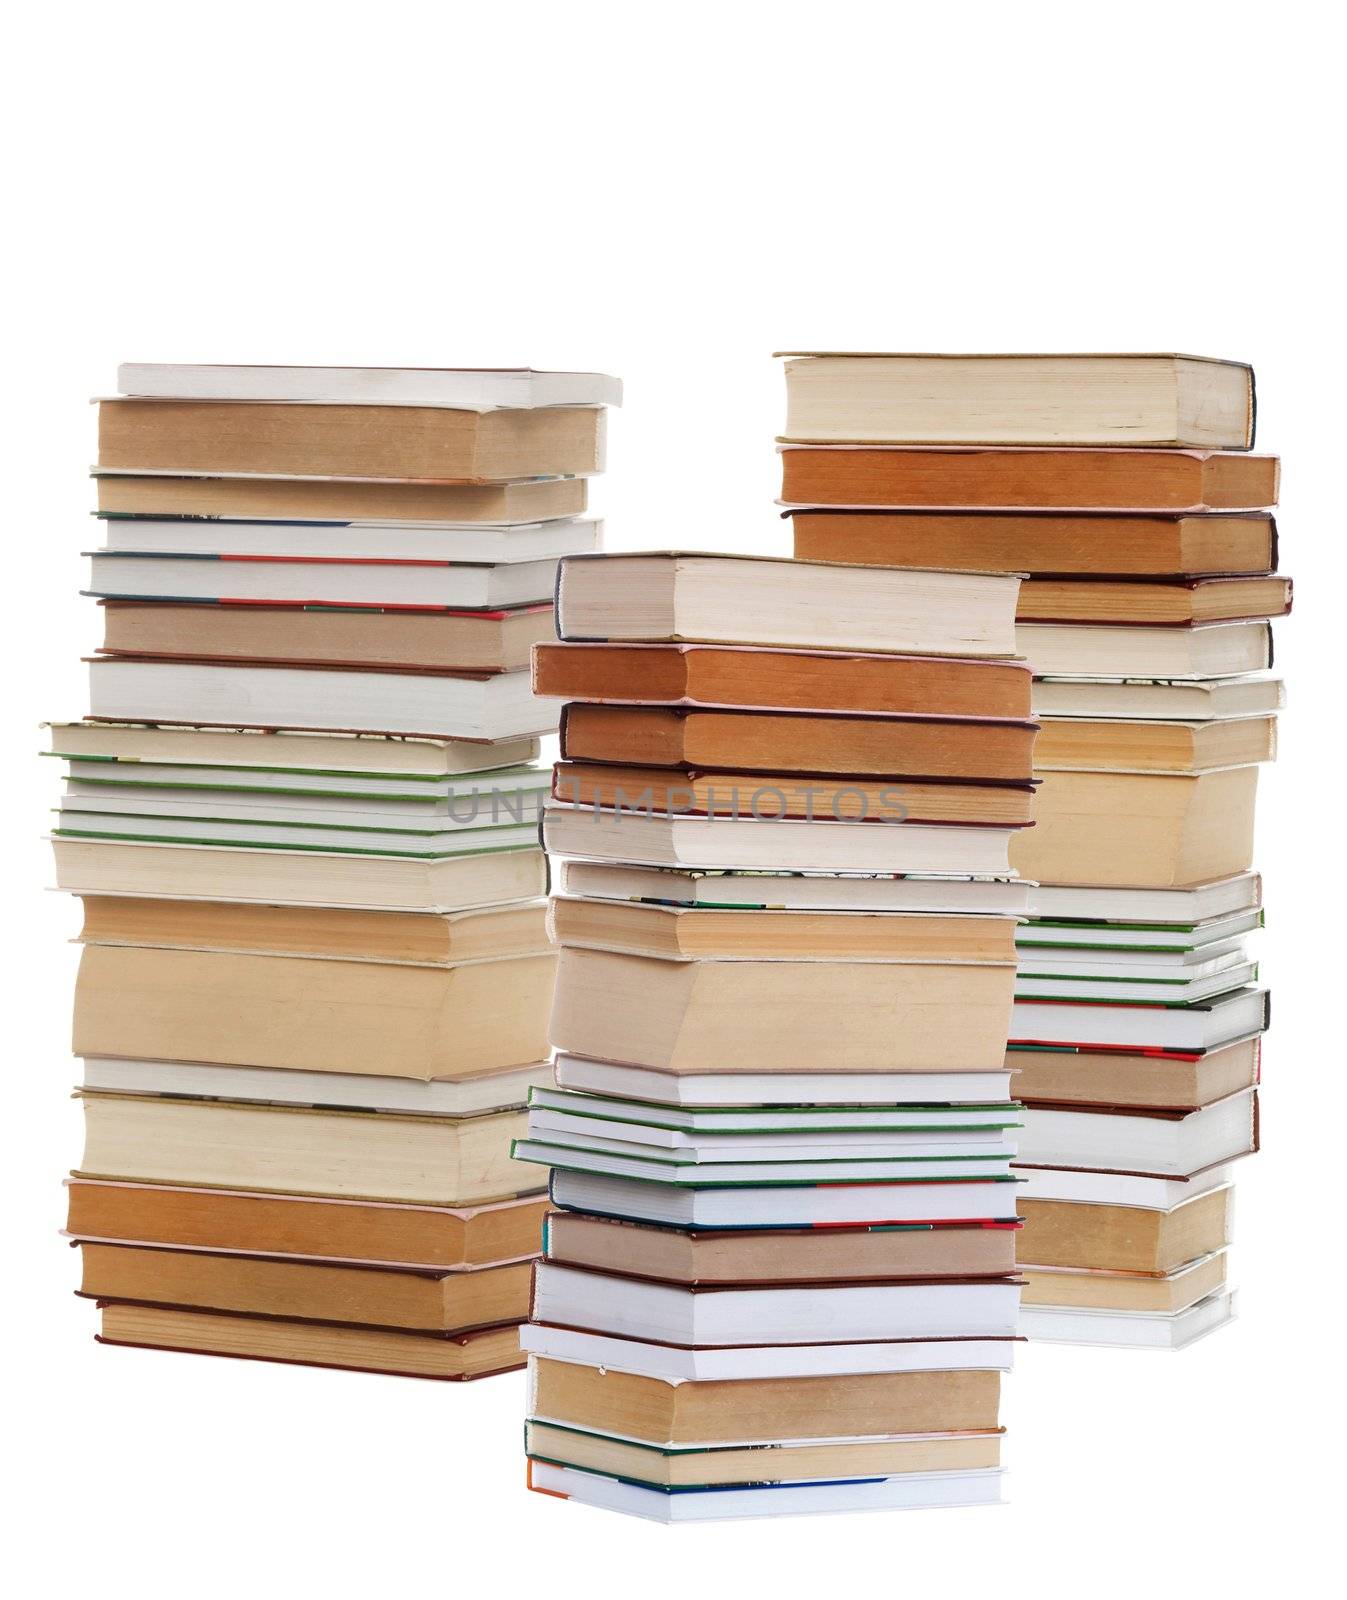 An image of stacks of books